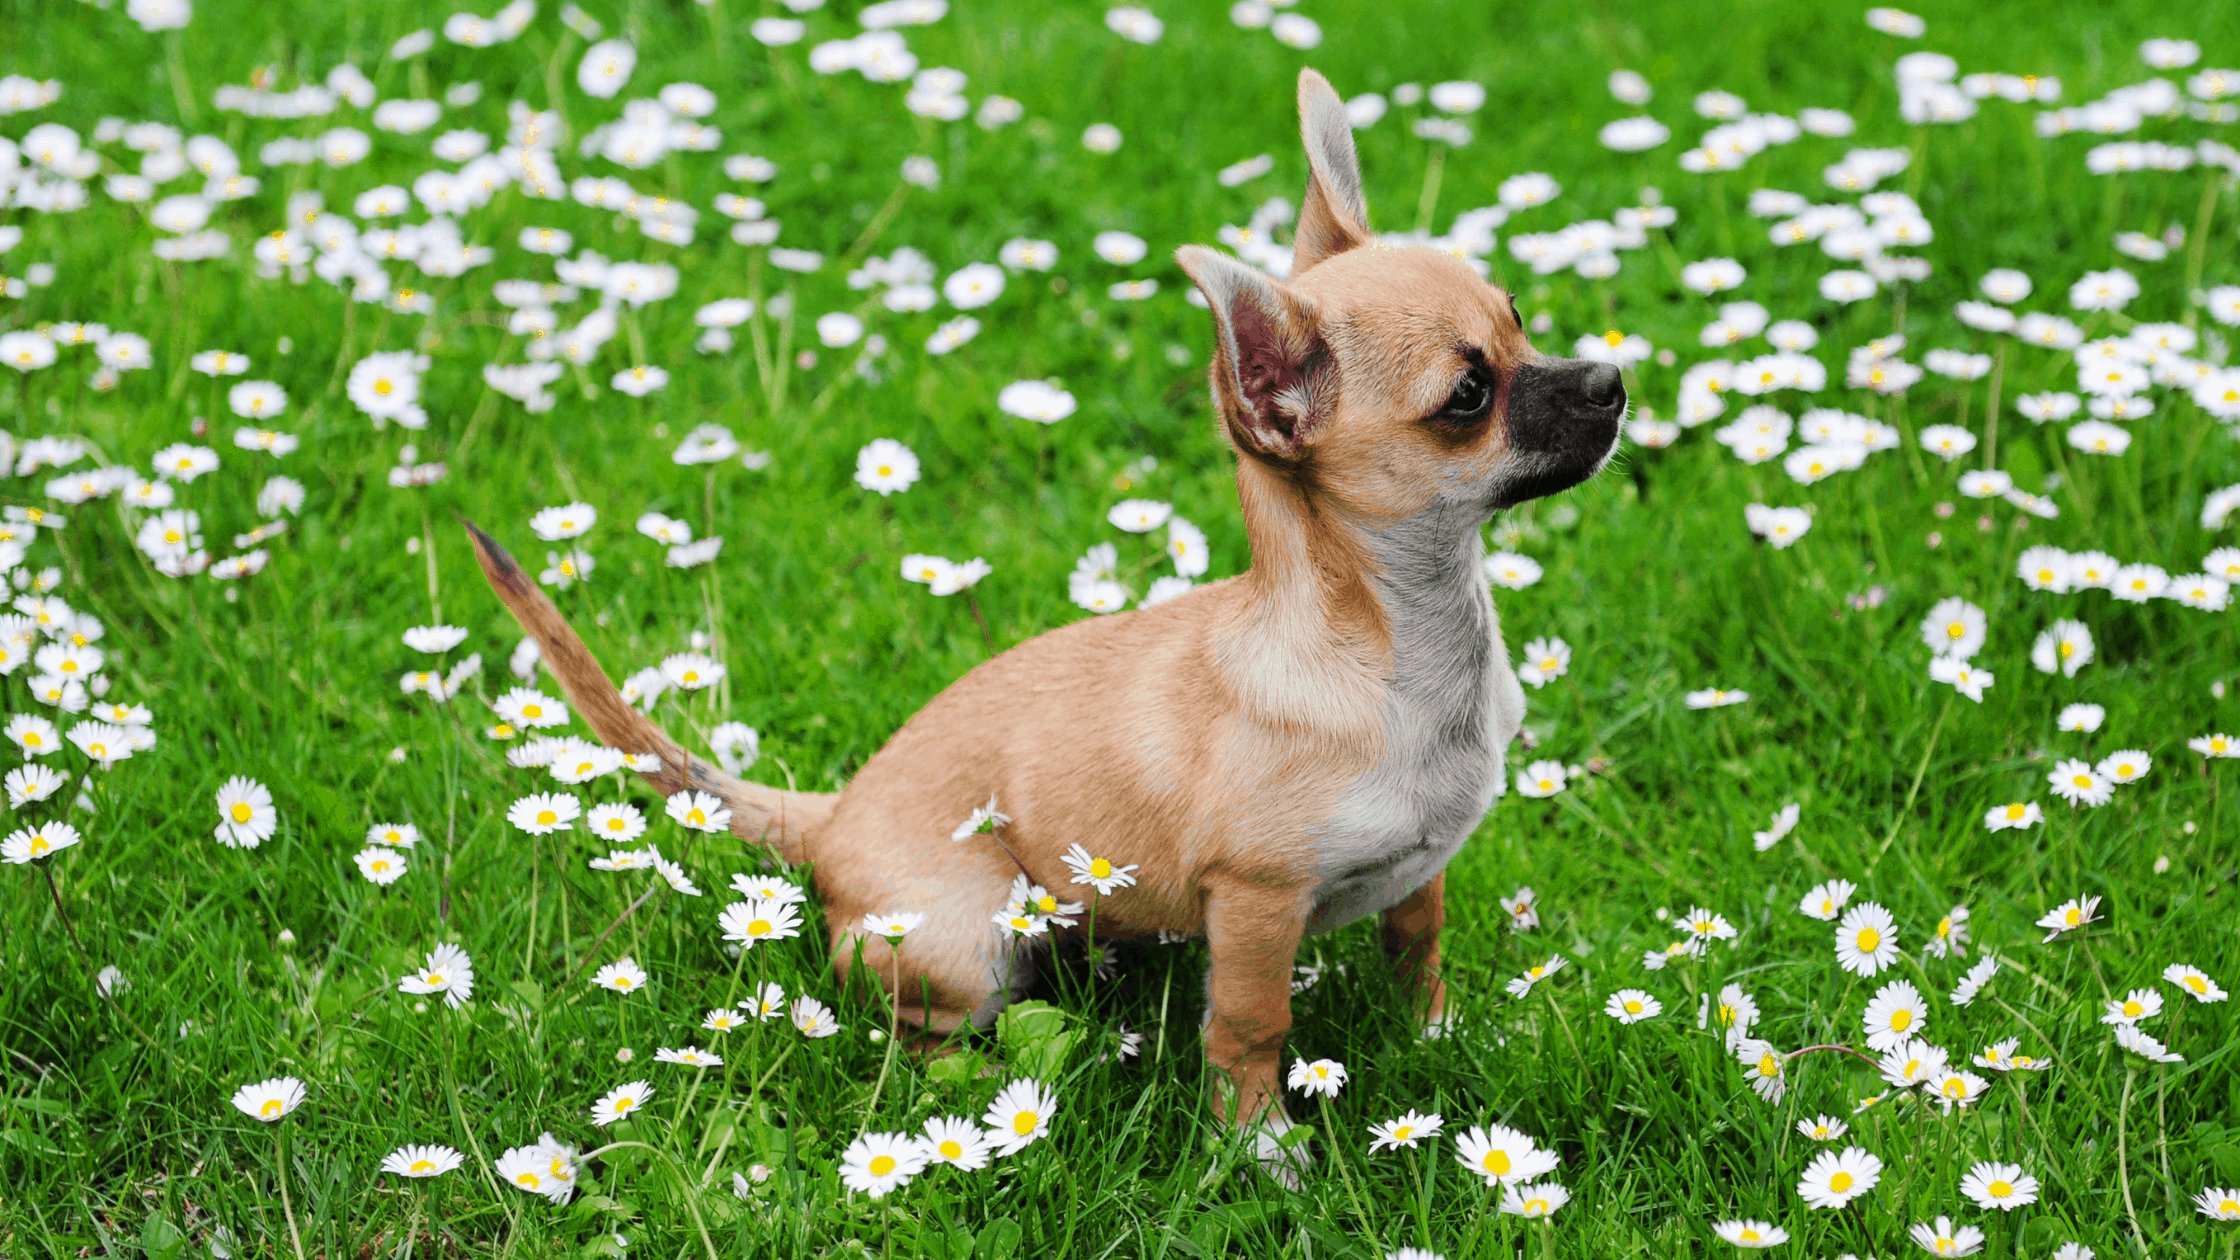 Chihuahuas often have a long life expectancy.